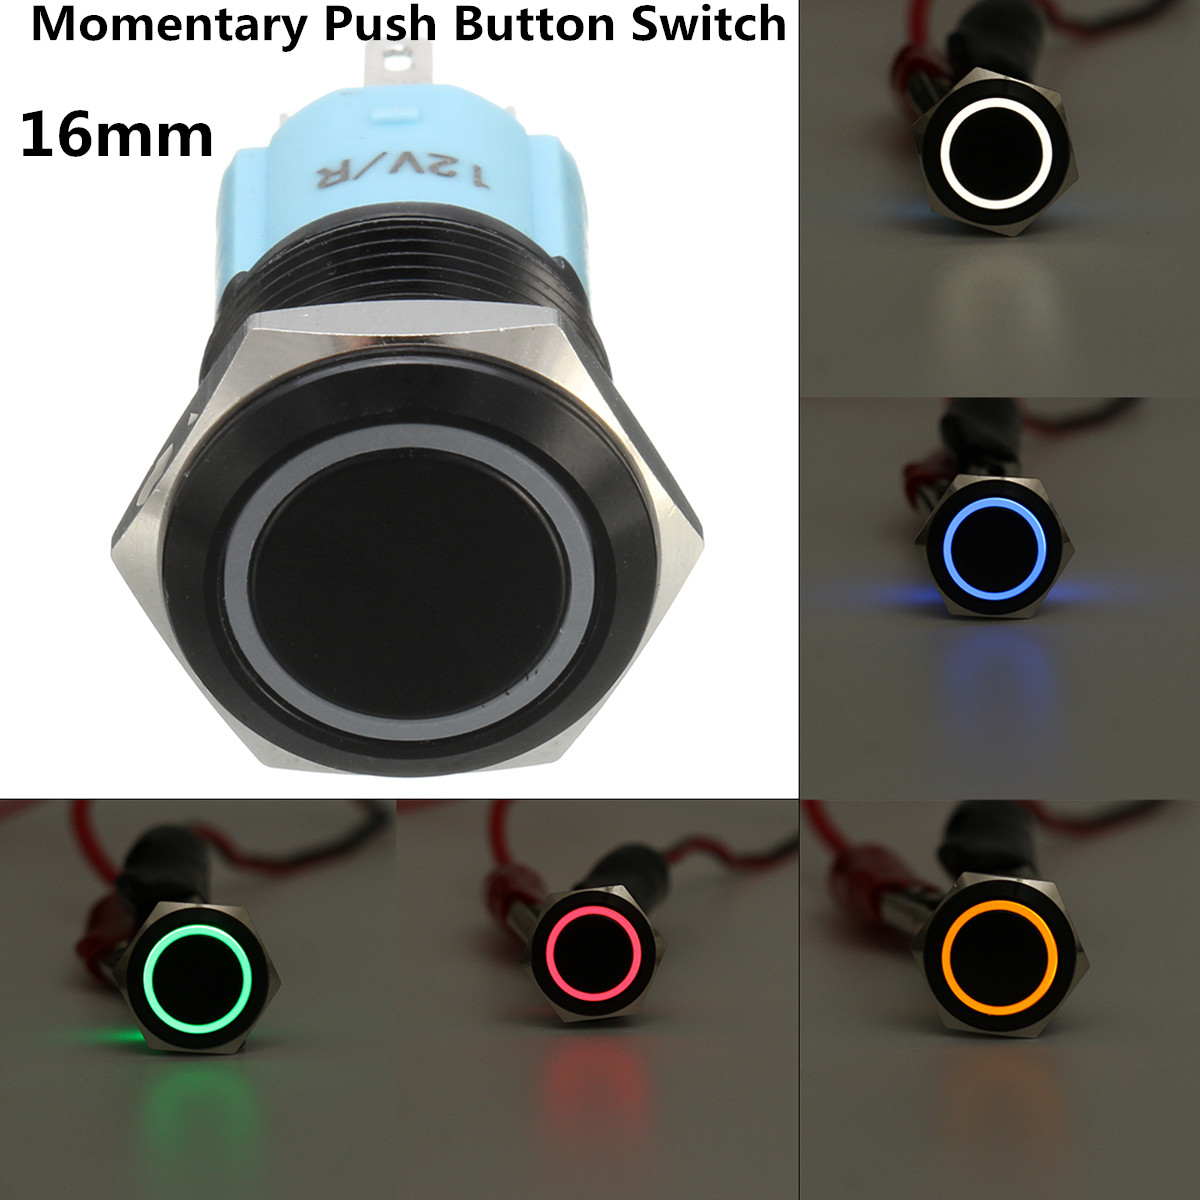 16mm momentary push led button switch